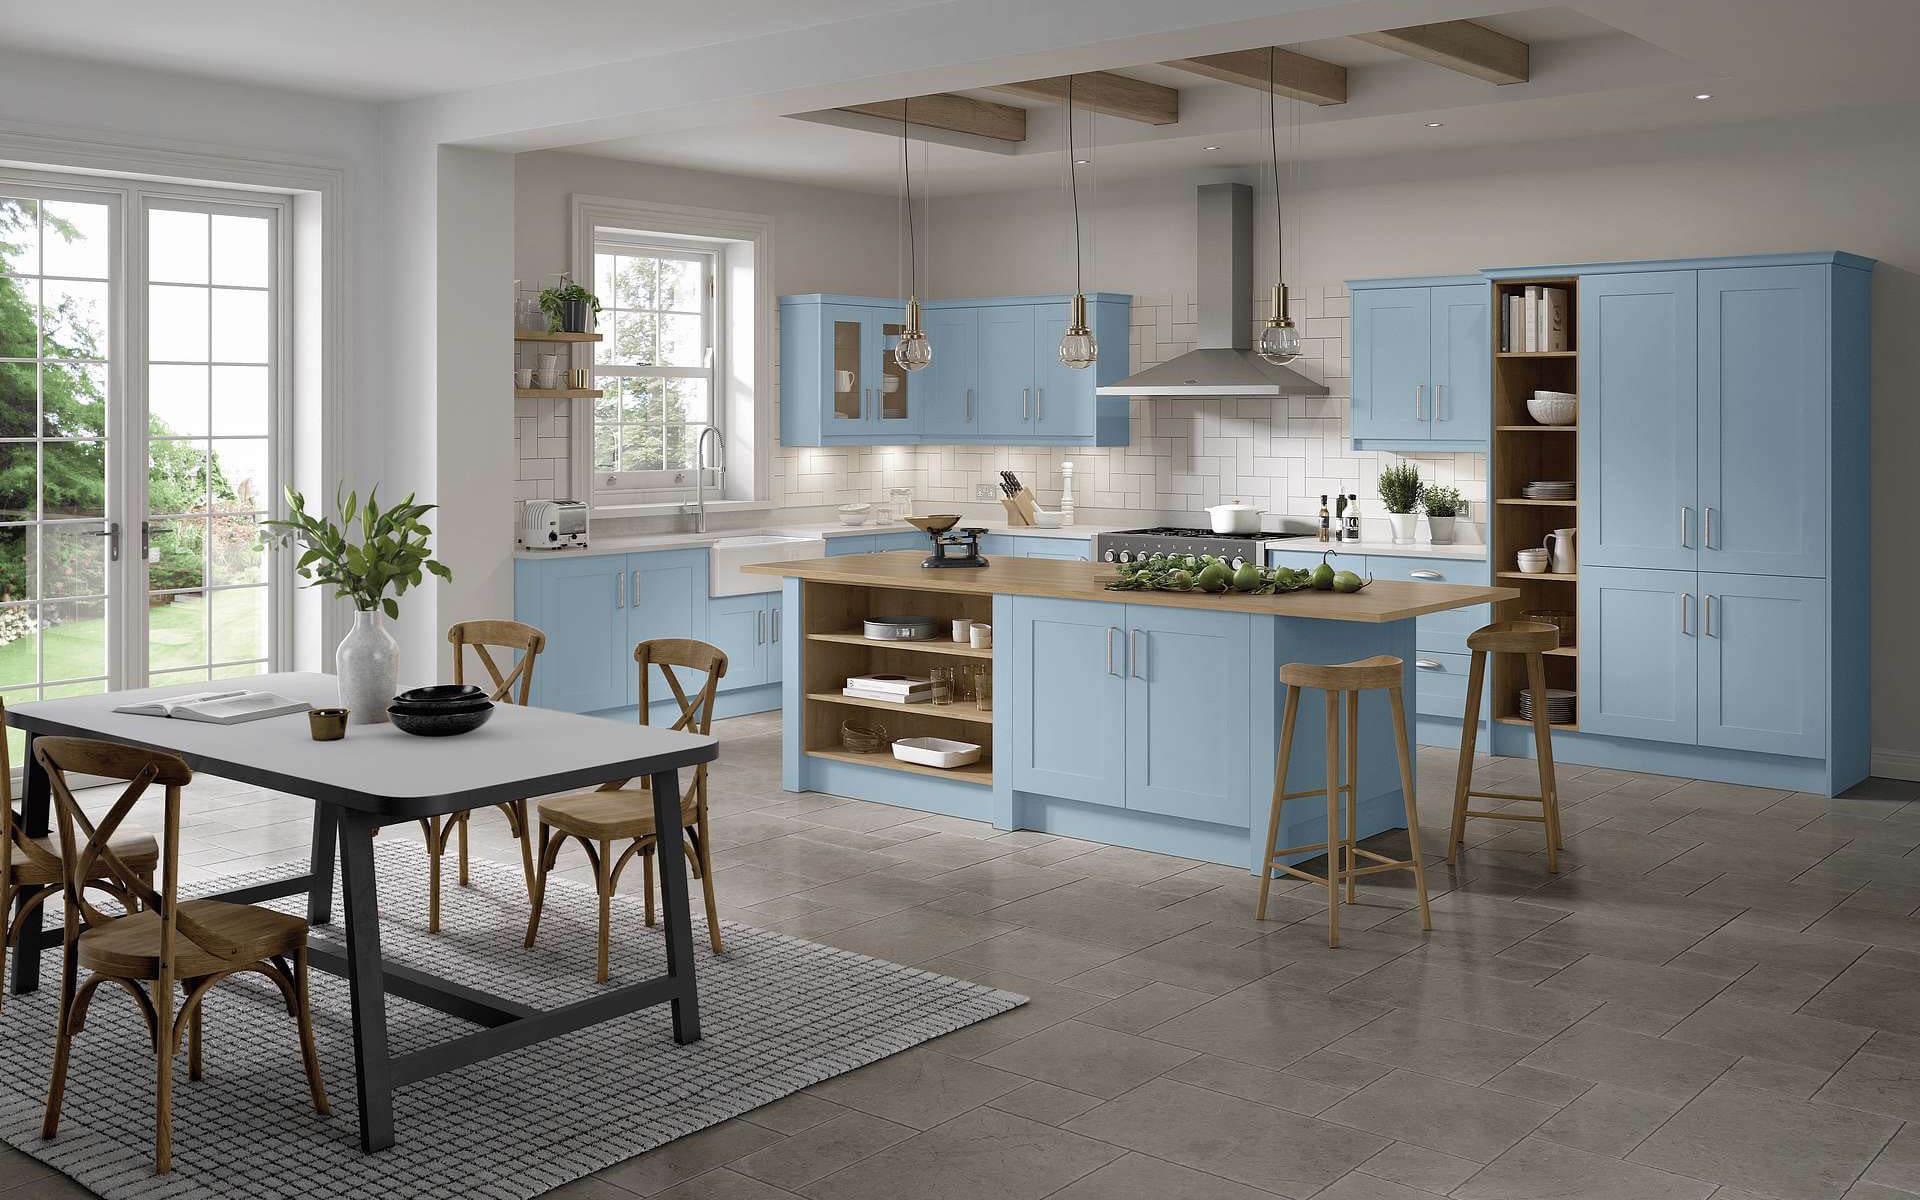 Denim Blue Shaker Kitchen With Belfast Sink For A Farmhouse Look And Feel - Better Kitchens 